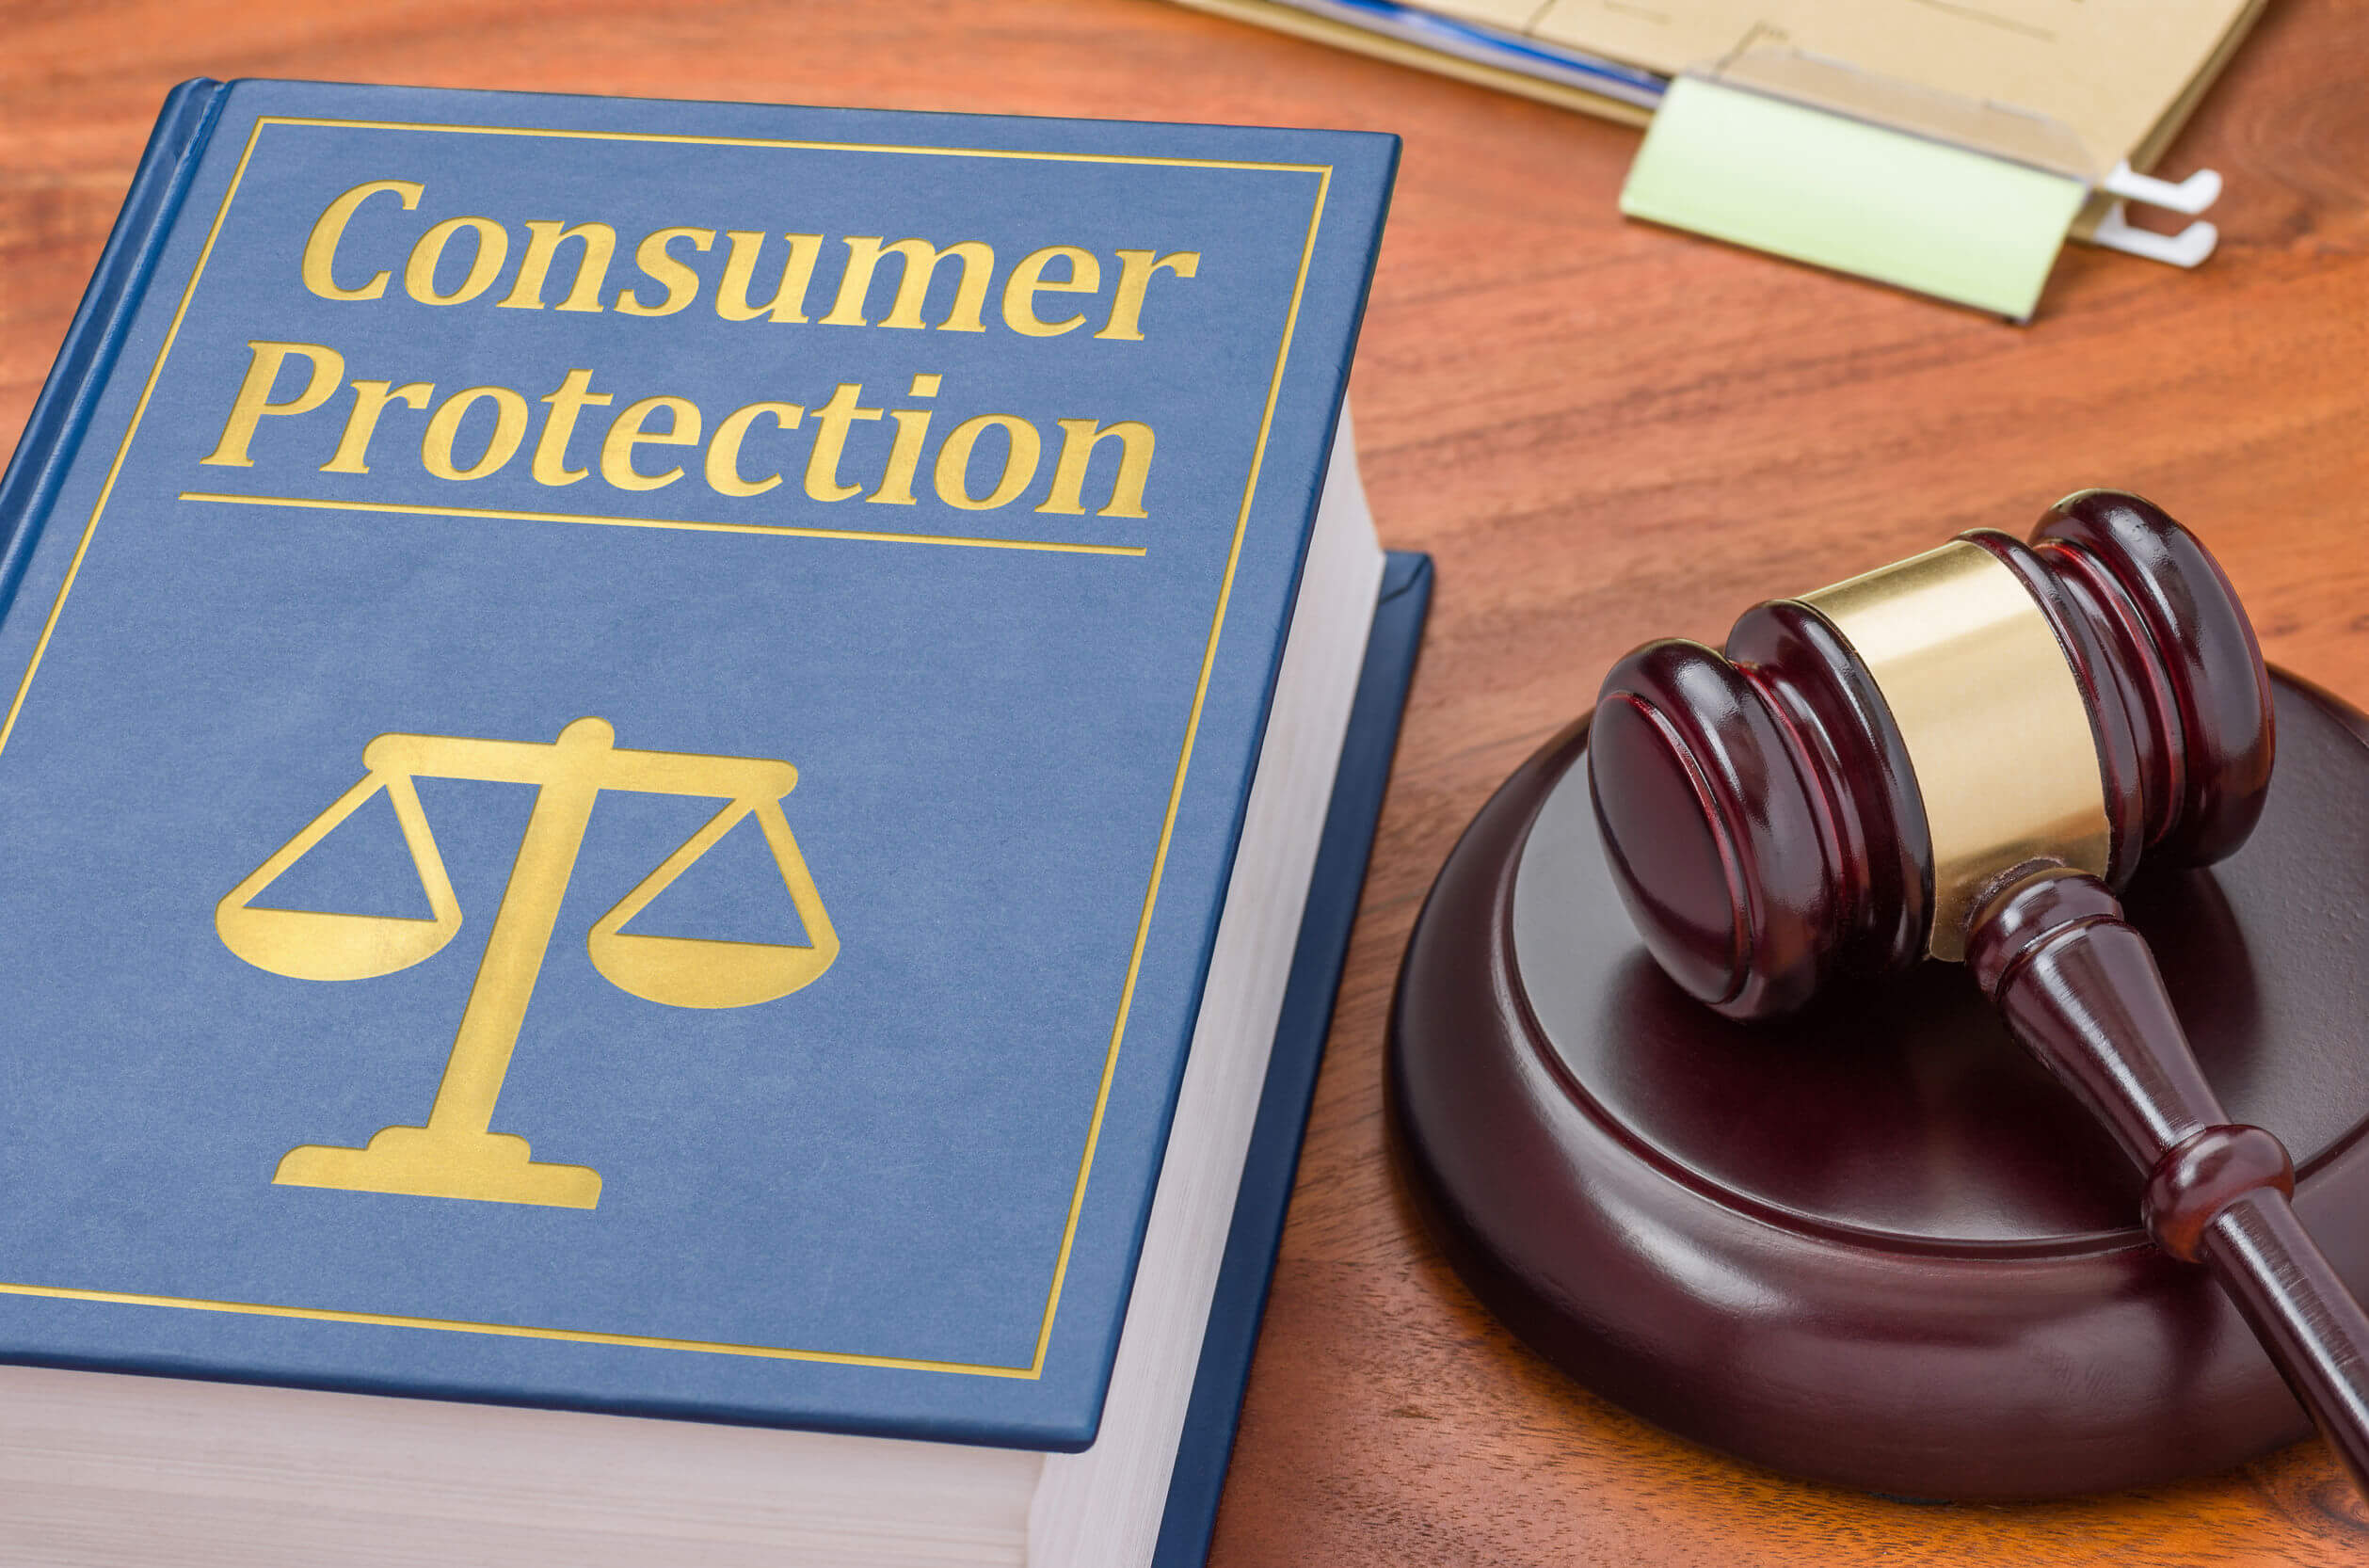 thesis on consumer protection law